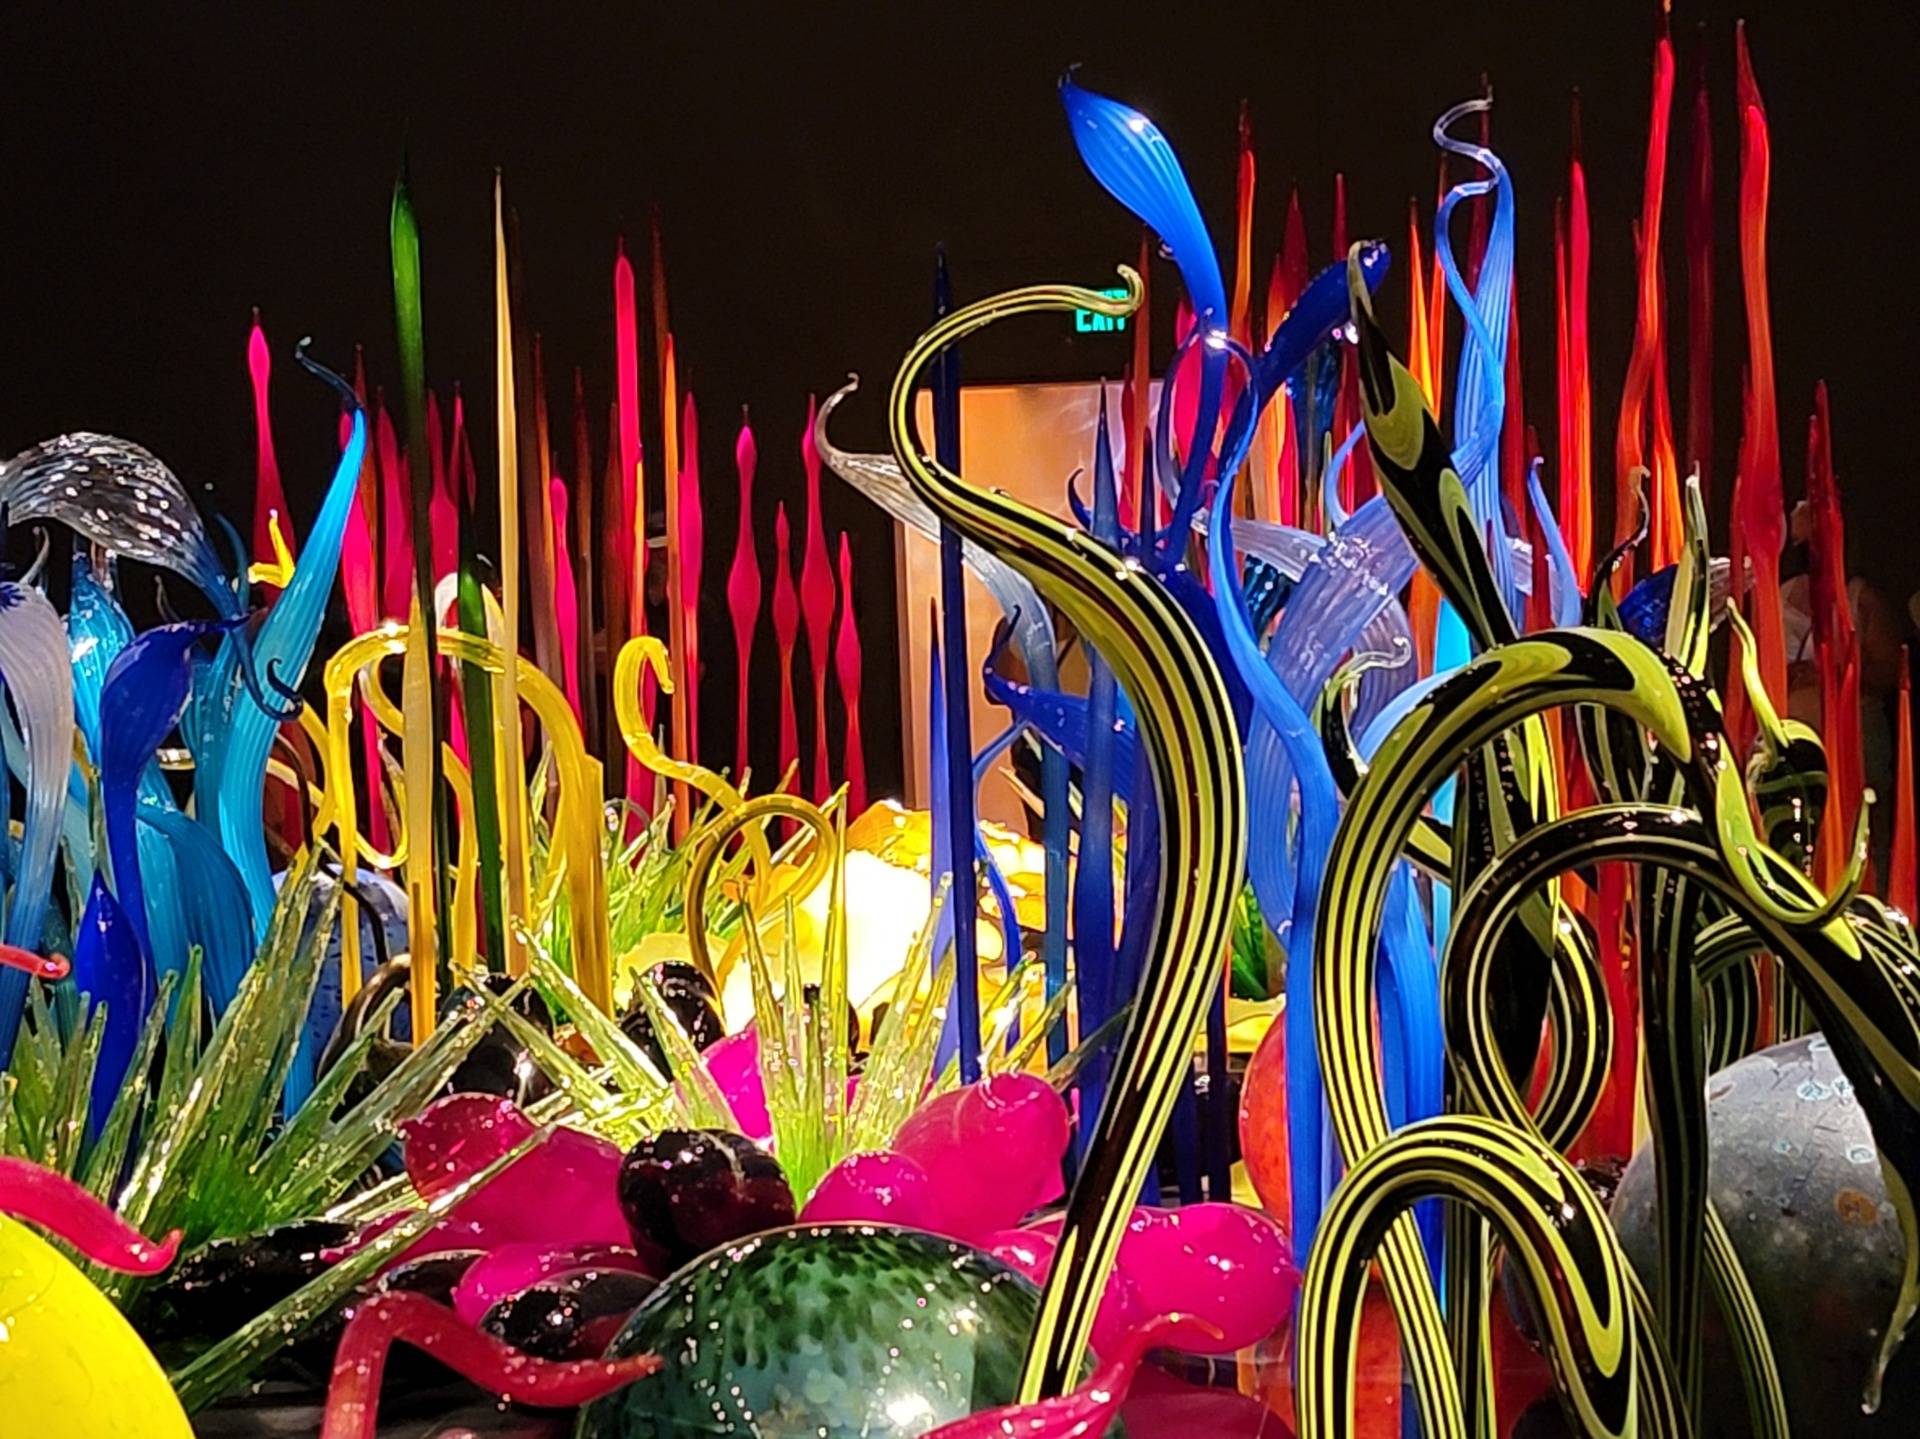 Just one of the many fantastic colorful glass arrangements inside.